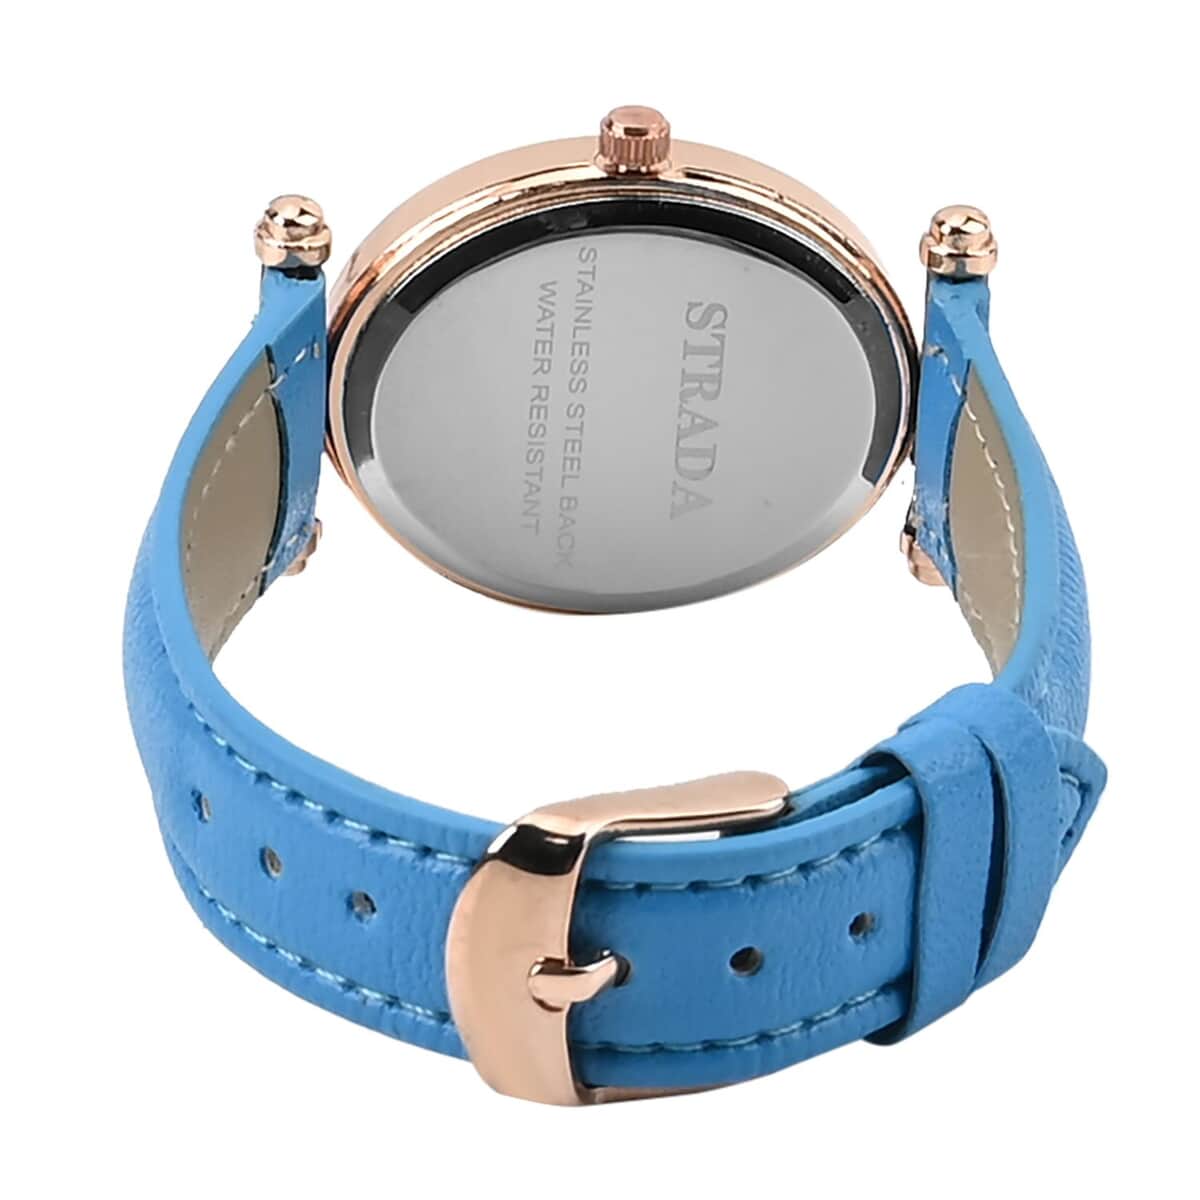 Strada White Austrian Crystal Japanese Movement Watch in Rosetone with Blue Faux Leather Strap (27.94-34.29mm) (6.75-8.50 Inches) image number 6